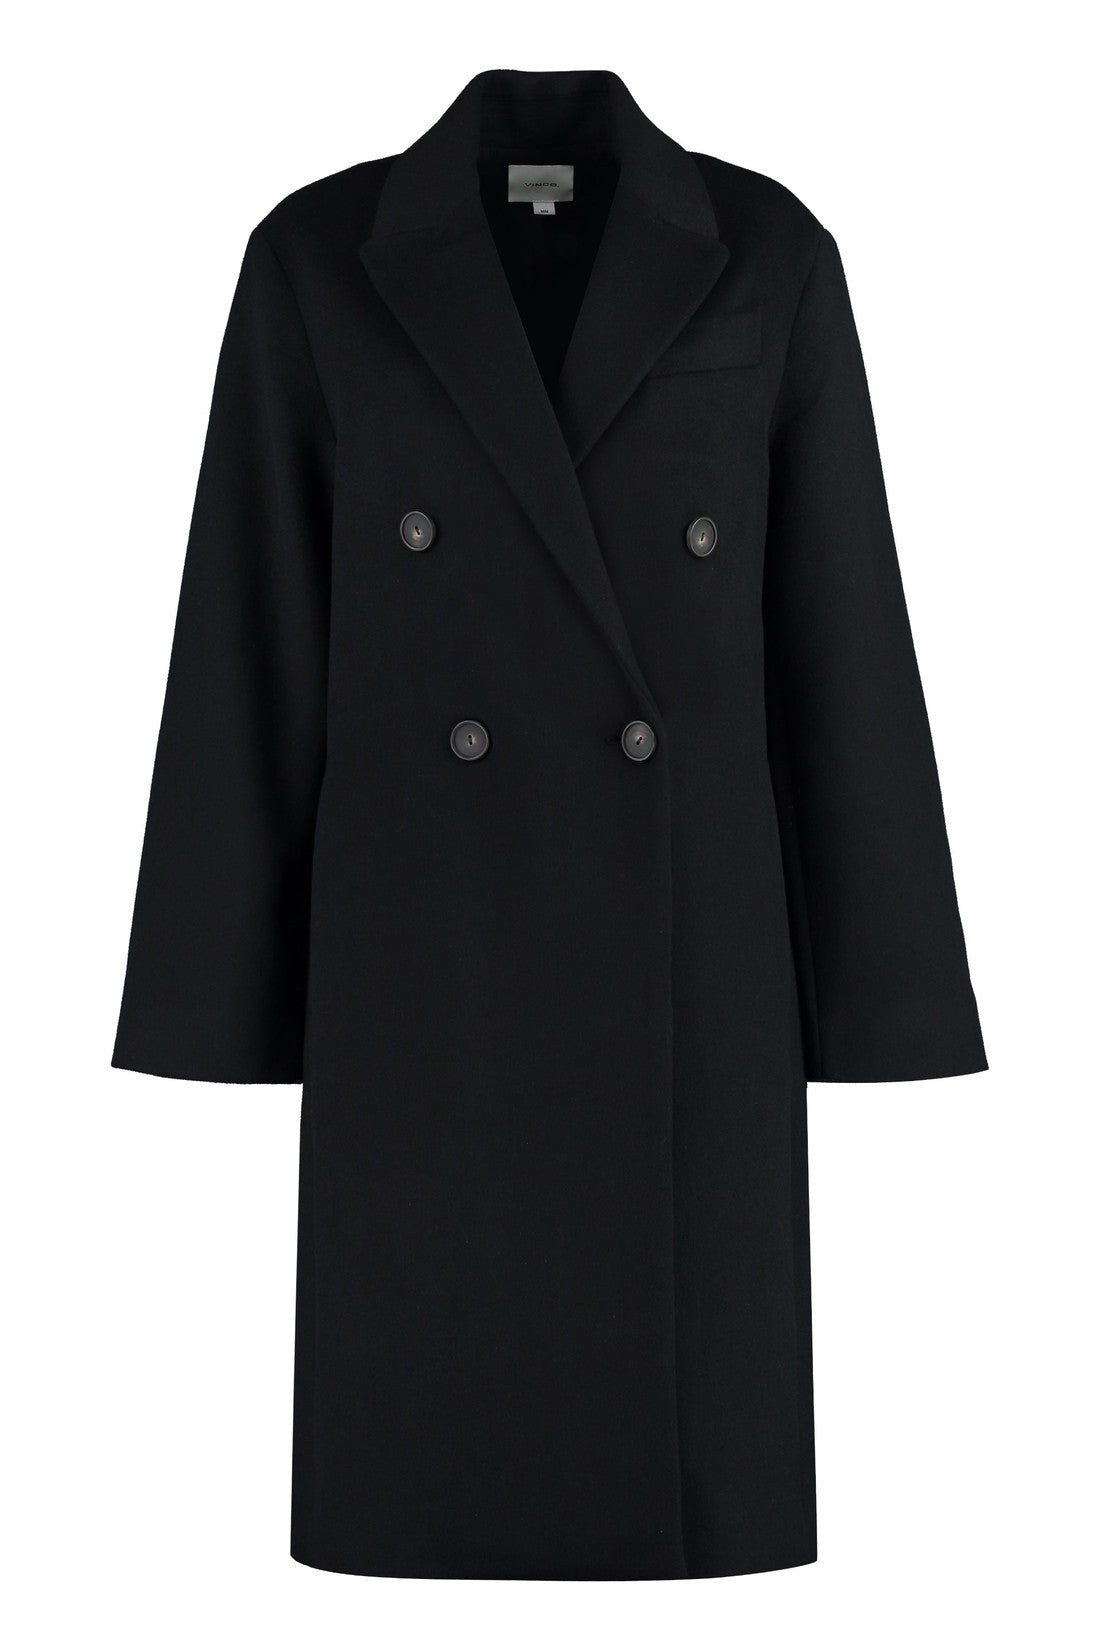 Vince-OUTLET-SALE-Wool blend double-breasted coat-ARCHIVIST